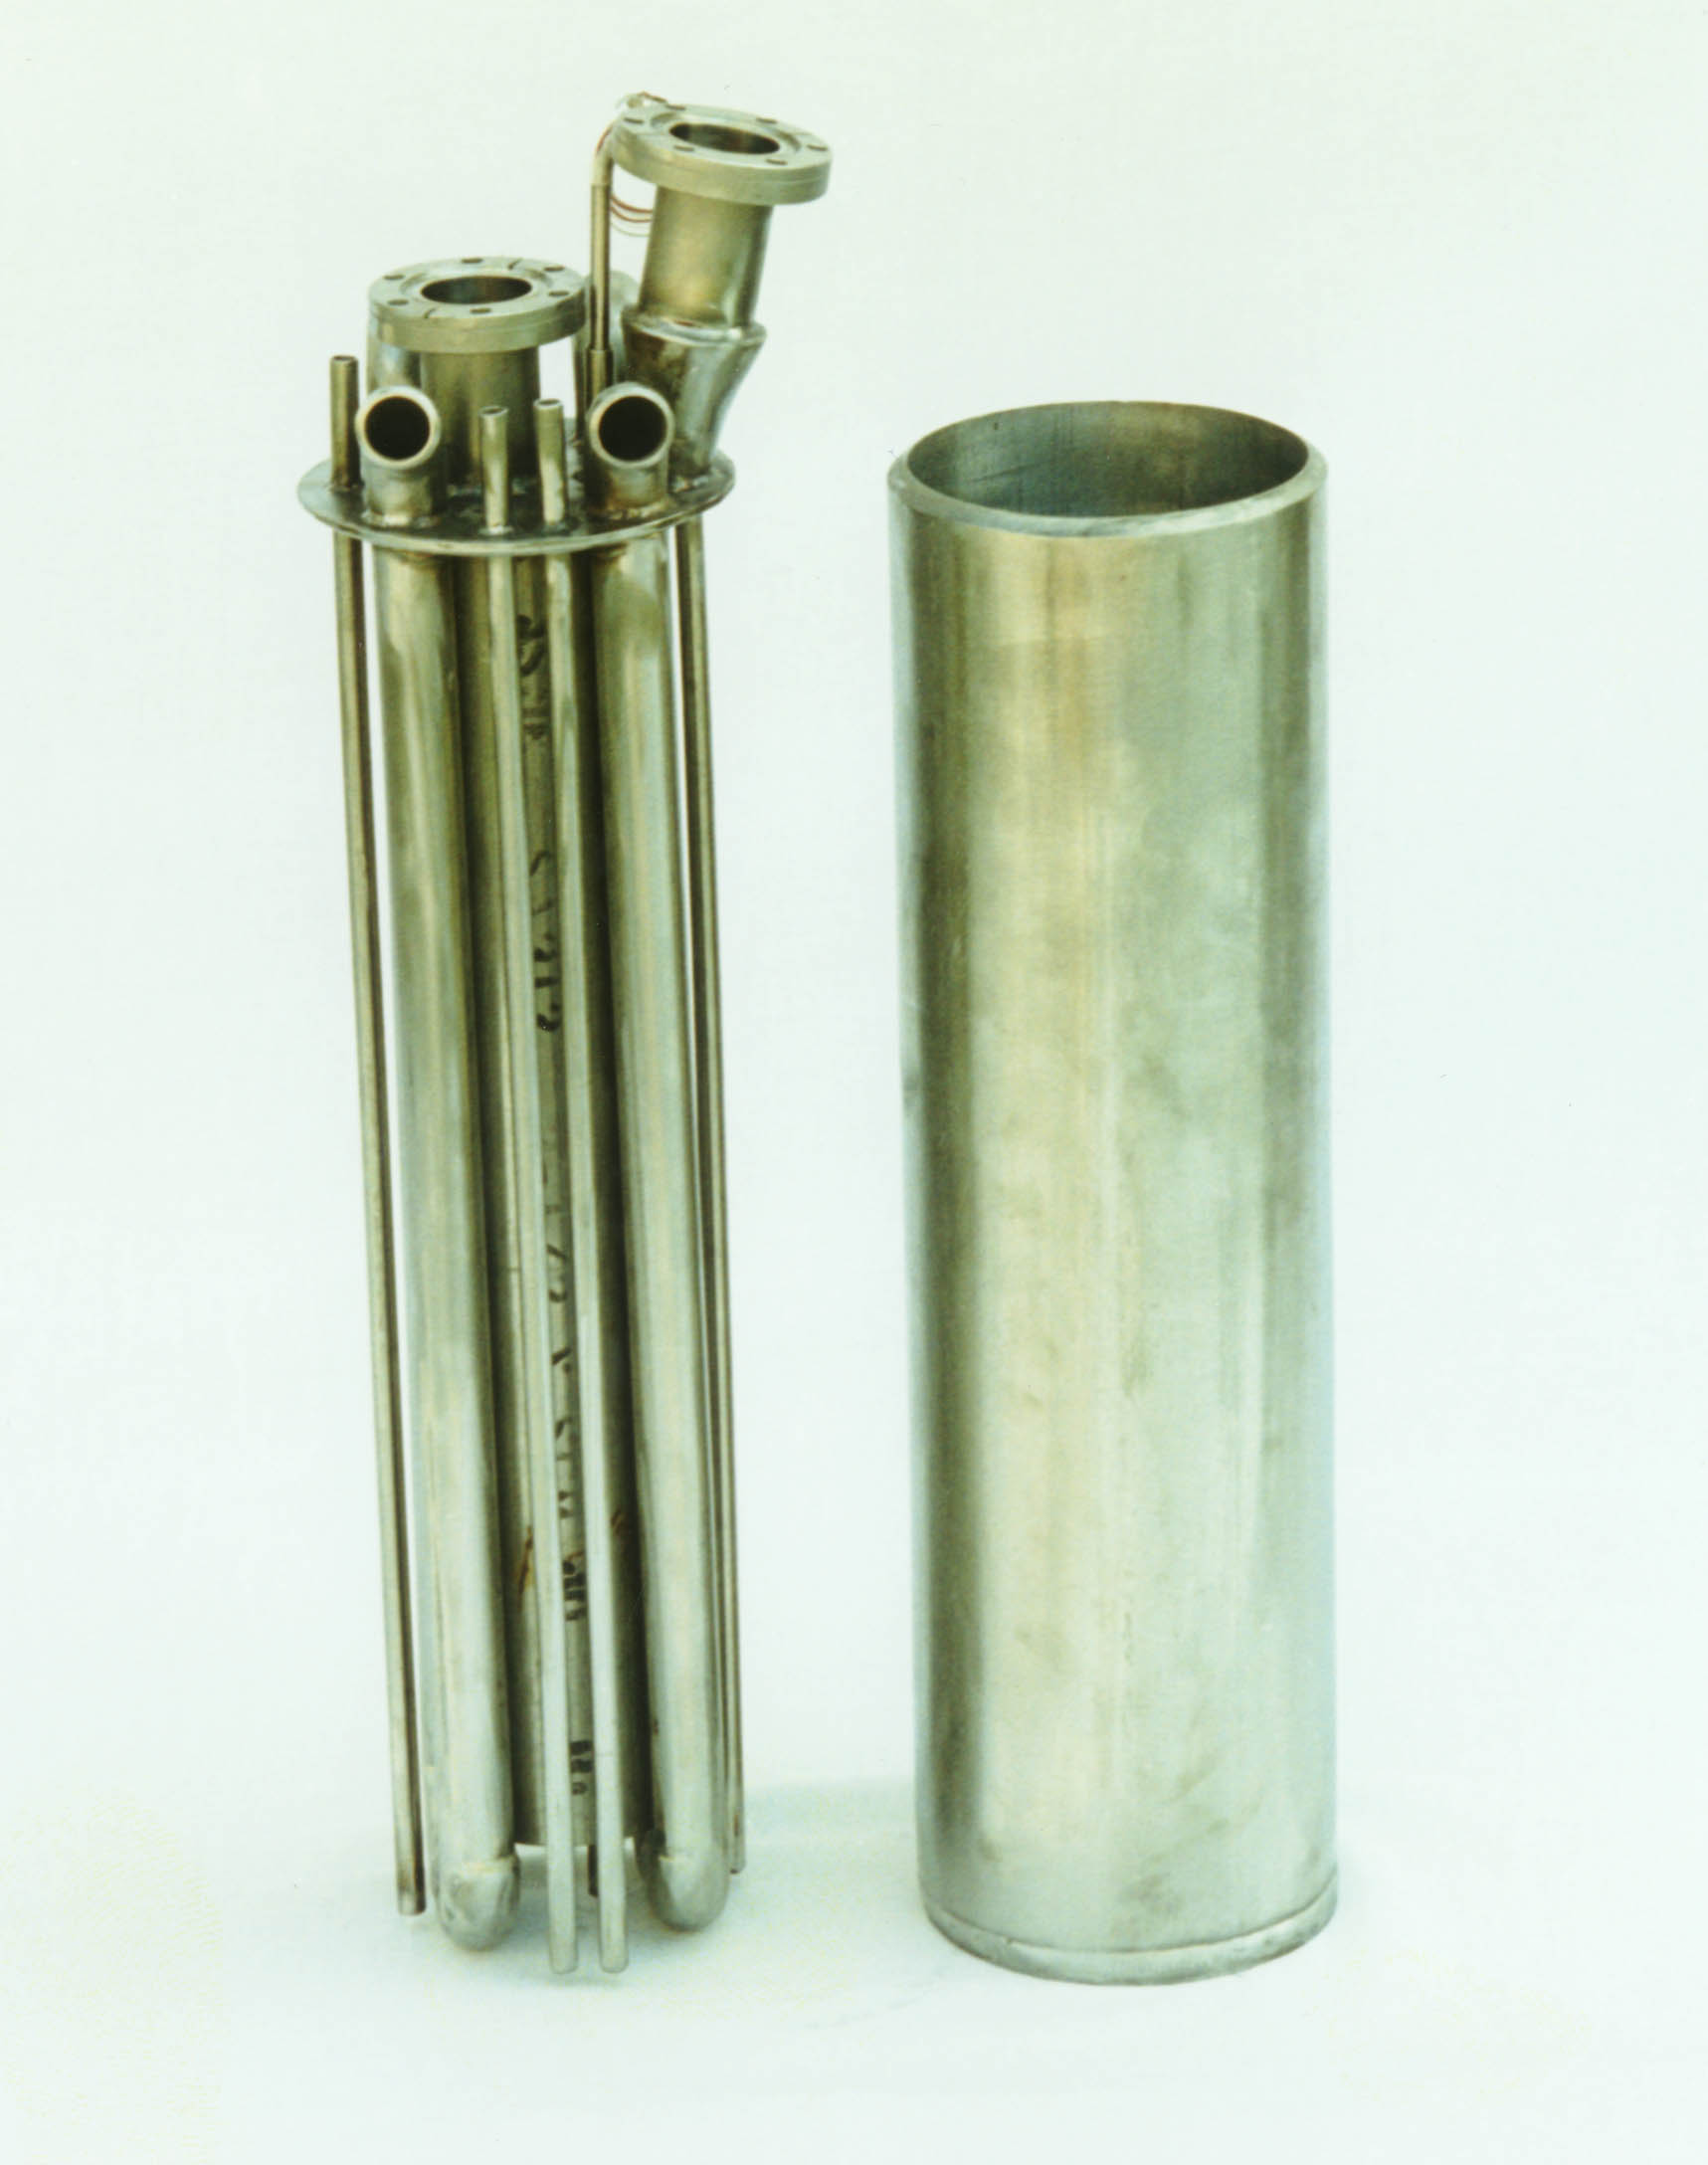 Figure 5. Photograph of the side view of the flow through bed prior to filling with Pd/k material and final assembly. After filling with Pd/k, the center pipe bundle is placed in the can and welded around the spacer. The taller flanged connection is the feed gas inlet to the annulus; the shorter flanged connection is exit gas outlet from the center pipe. Note flat end caps.